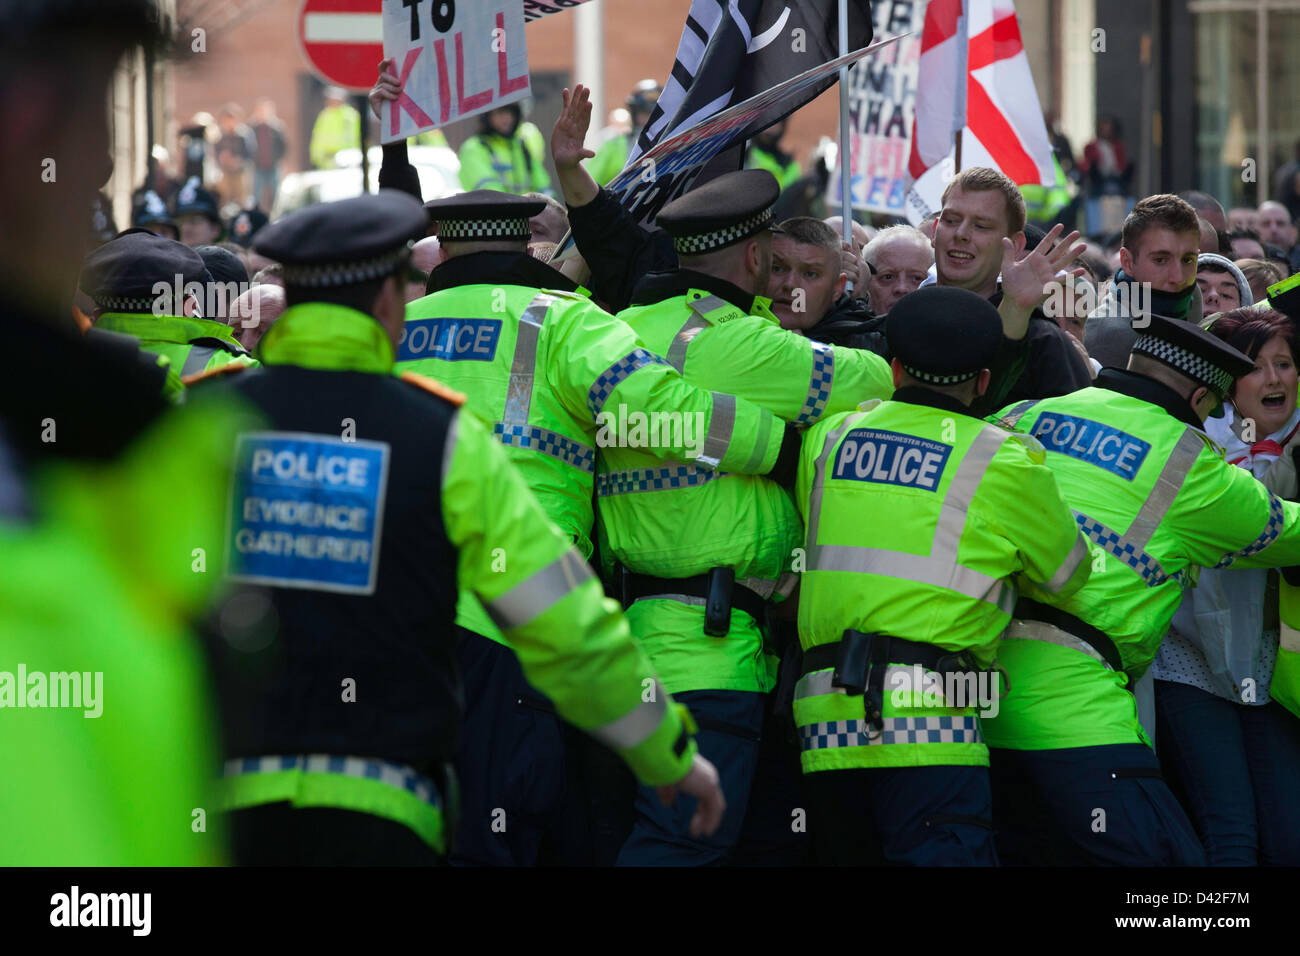 Manchester, UK. 2nd March 2013. Members of the far-right English Defence League (EDL) clash with police during a protest in Manchester. Approximately 300 members of the 'Islamophobic' group attended. members of the EDL tried to break the police lines while marching towards Albert Square. Credit: Lydia Pagoni/Alamy Live News Stock Photo